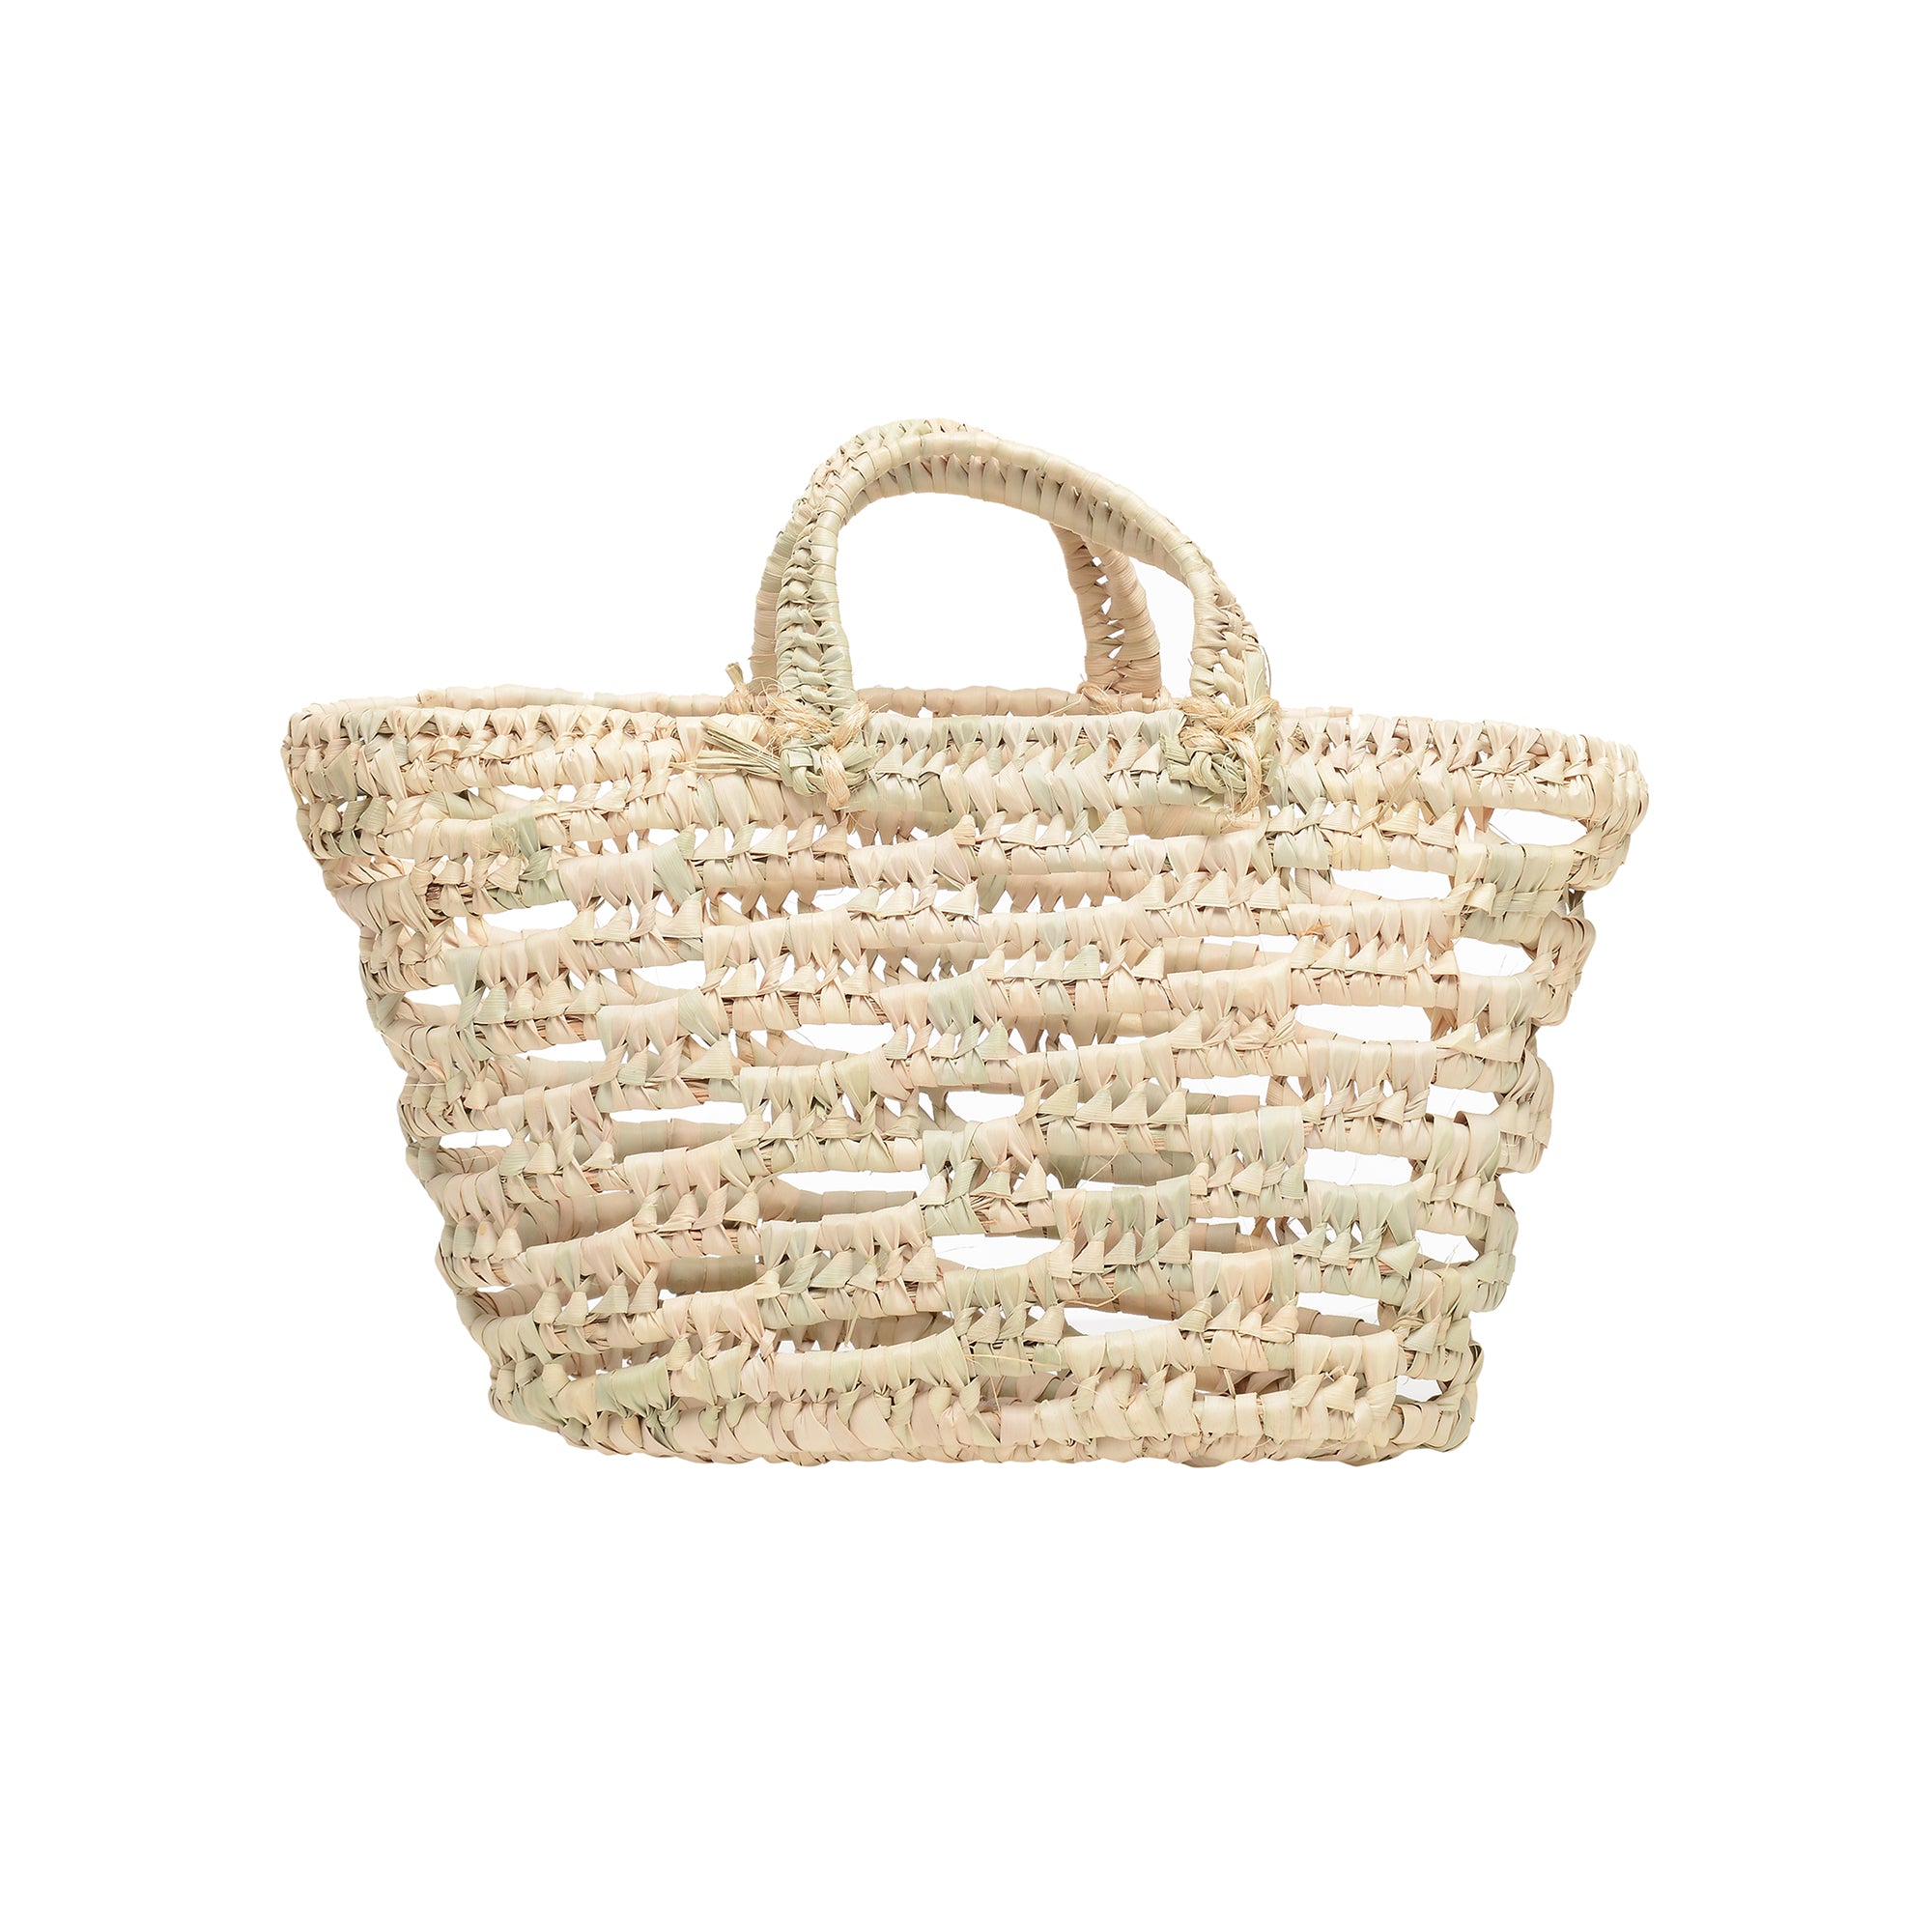 EXCLUSIVE small open weave Mallorcan tote